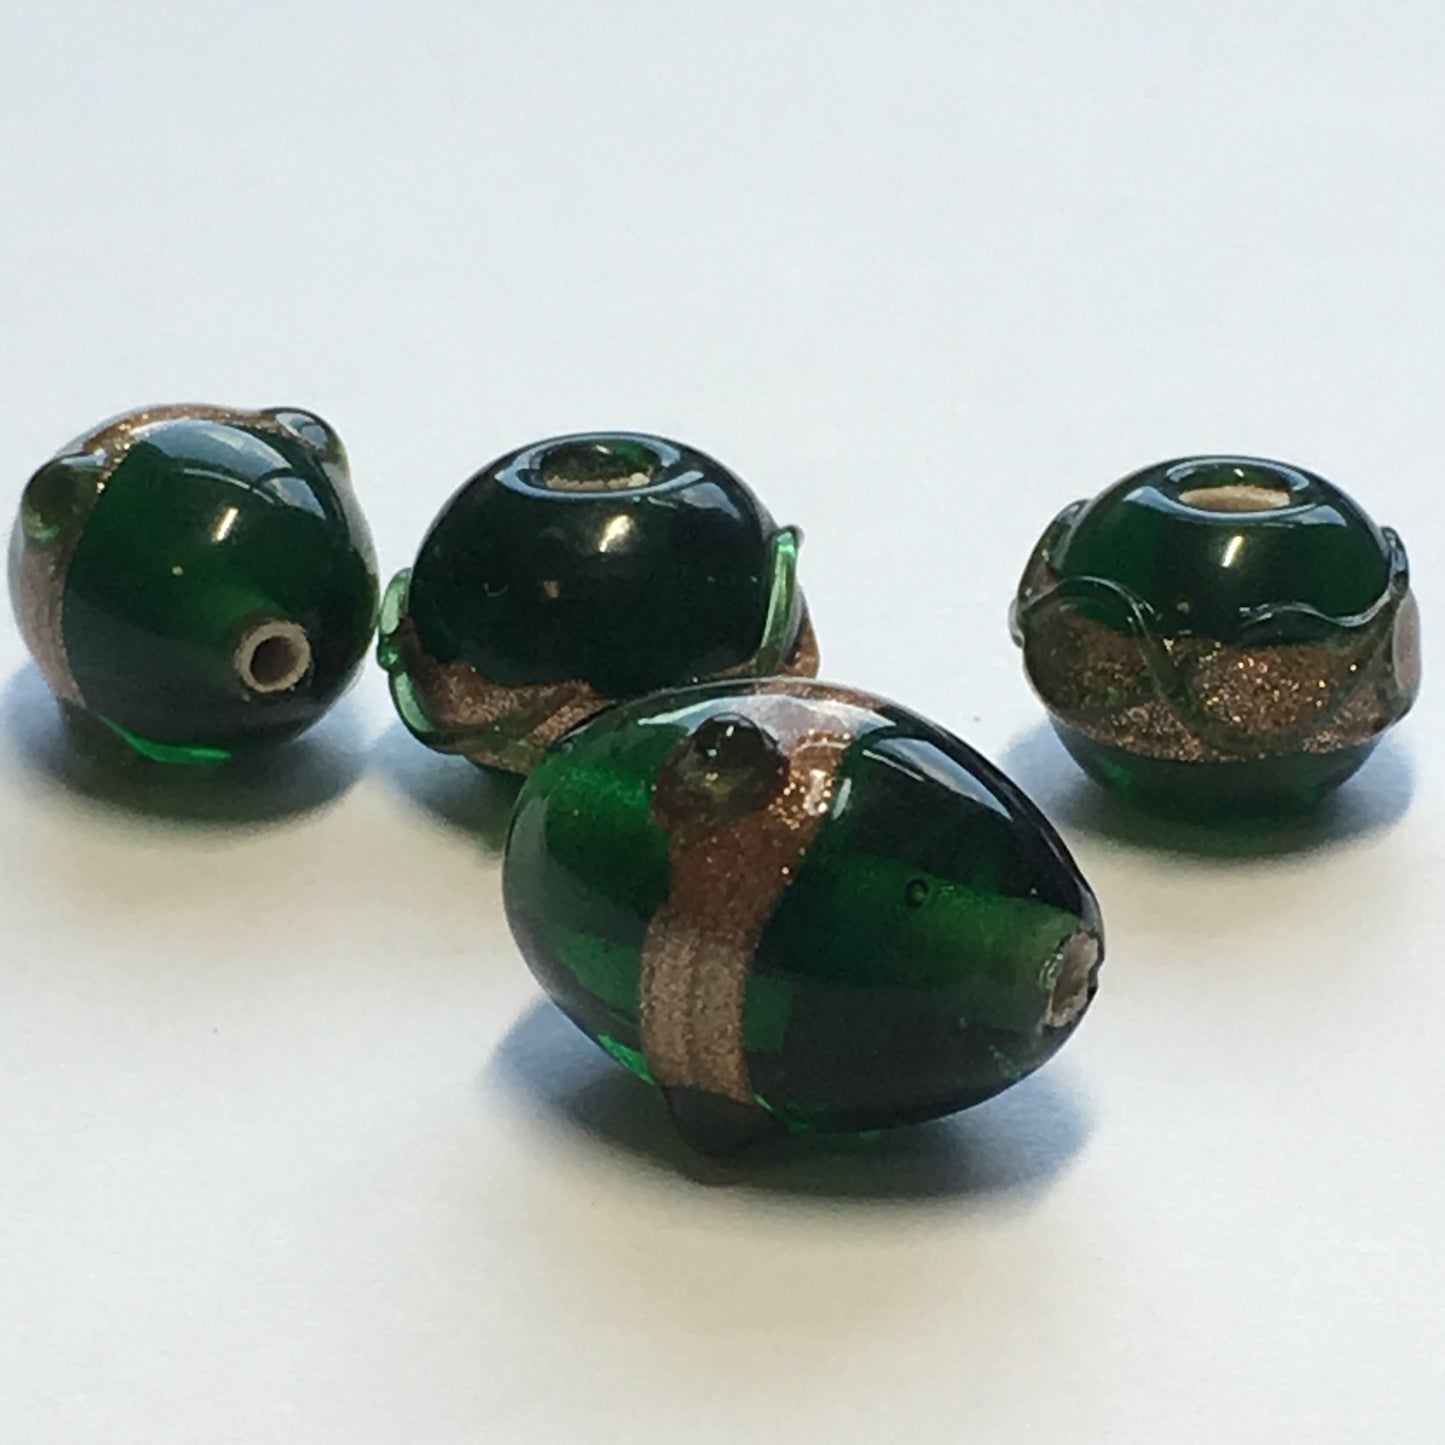 Green Glass Lampwork Beads, 12.5 x 10 mm Oval (2) and 9.5 x 12 mm Round (2)